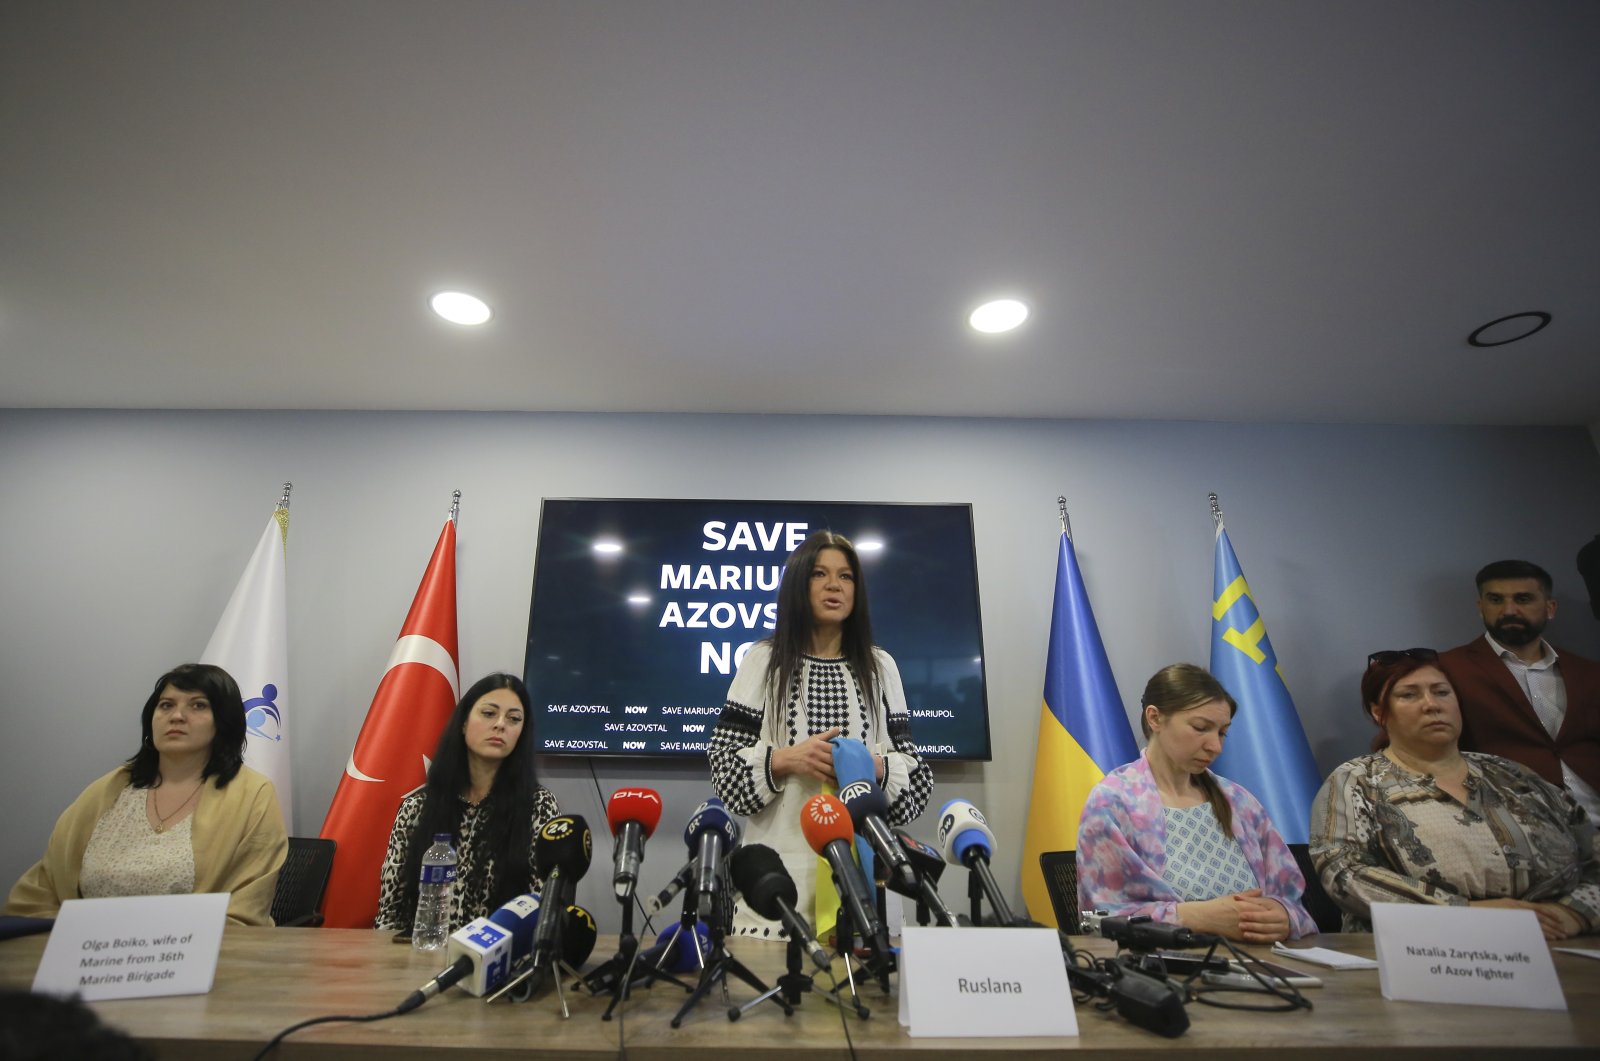 Ruslana (C), a Ukrainian singer and former Eurovision song contest winner, speaks during a news conference in Istanbul, Turkey, May 16, 2022. (AP Photo)